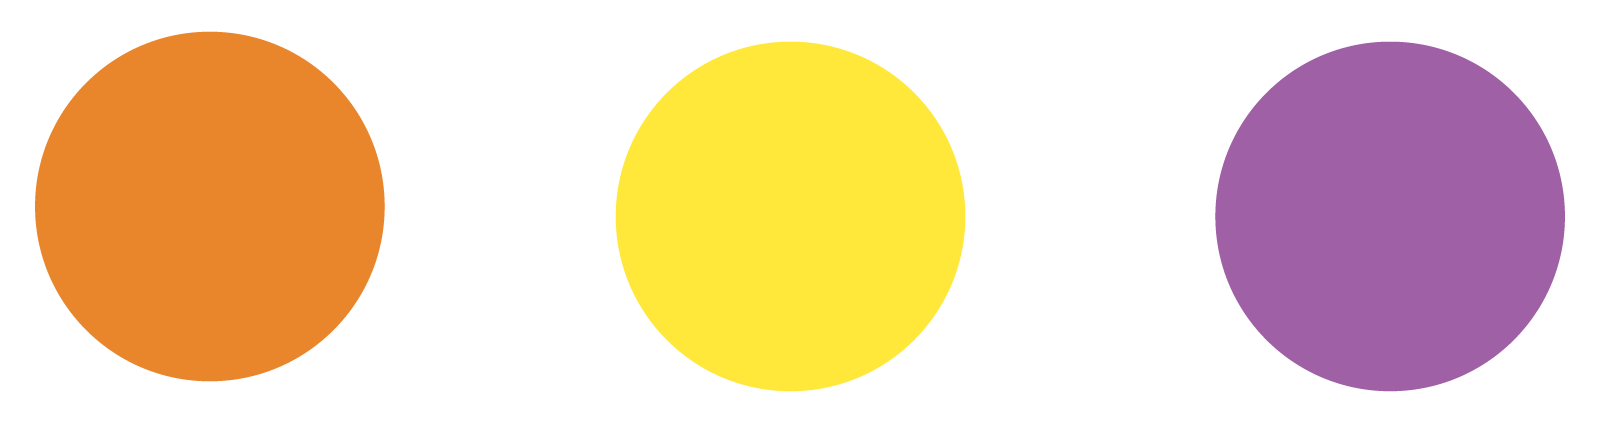 A yellow sun is shown on a black background.